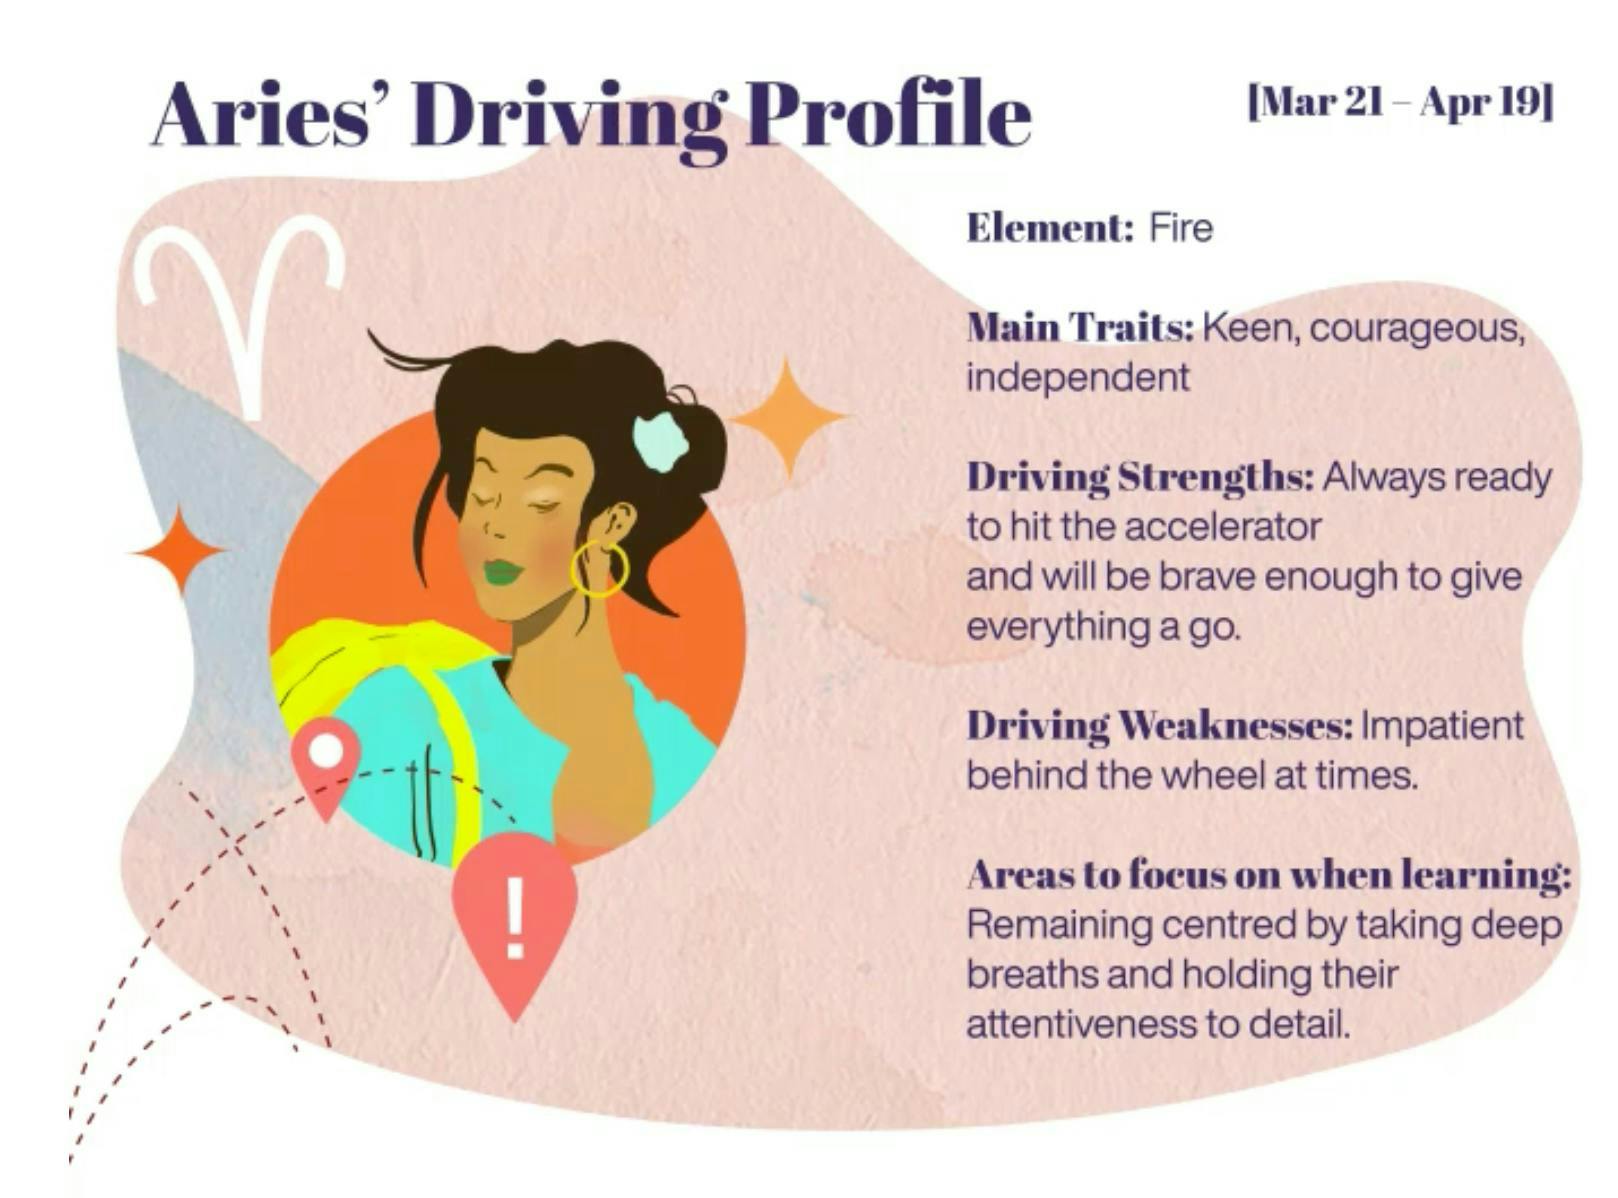 Aries driving profile